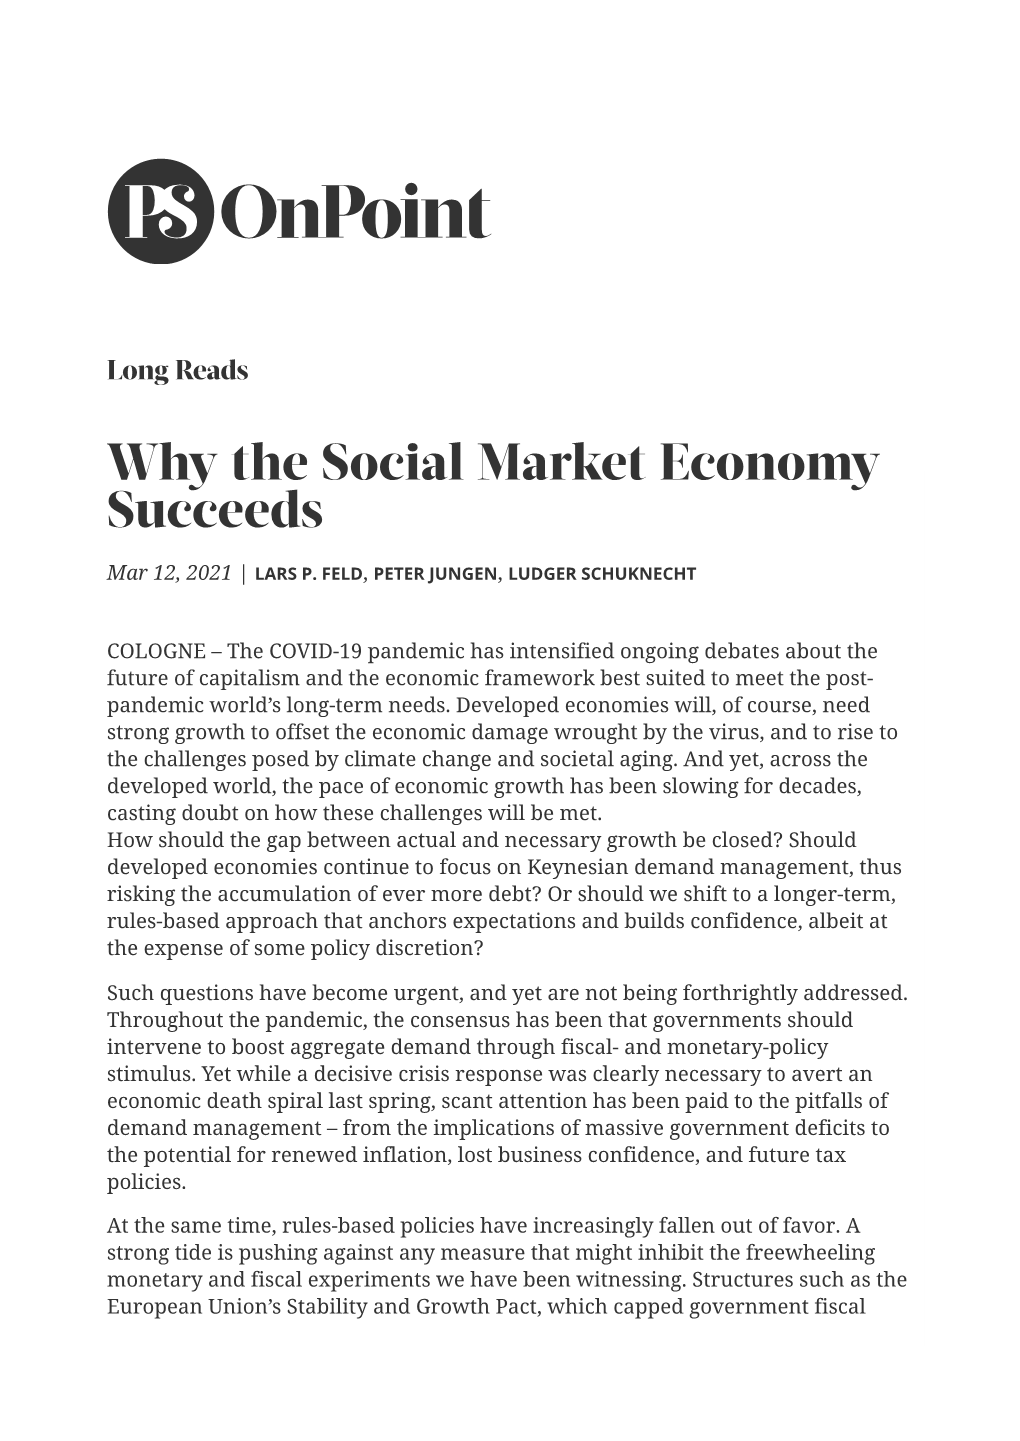 Why the Social Market Economy Succeeds